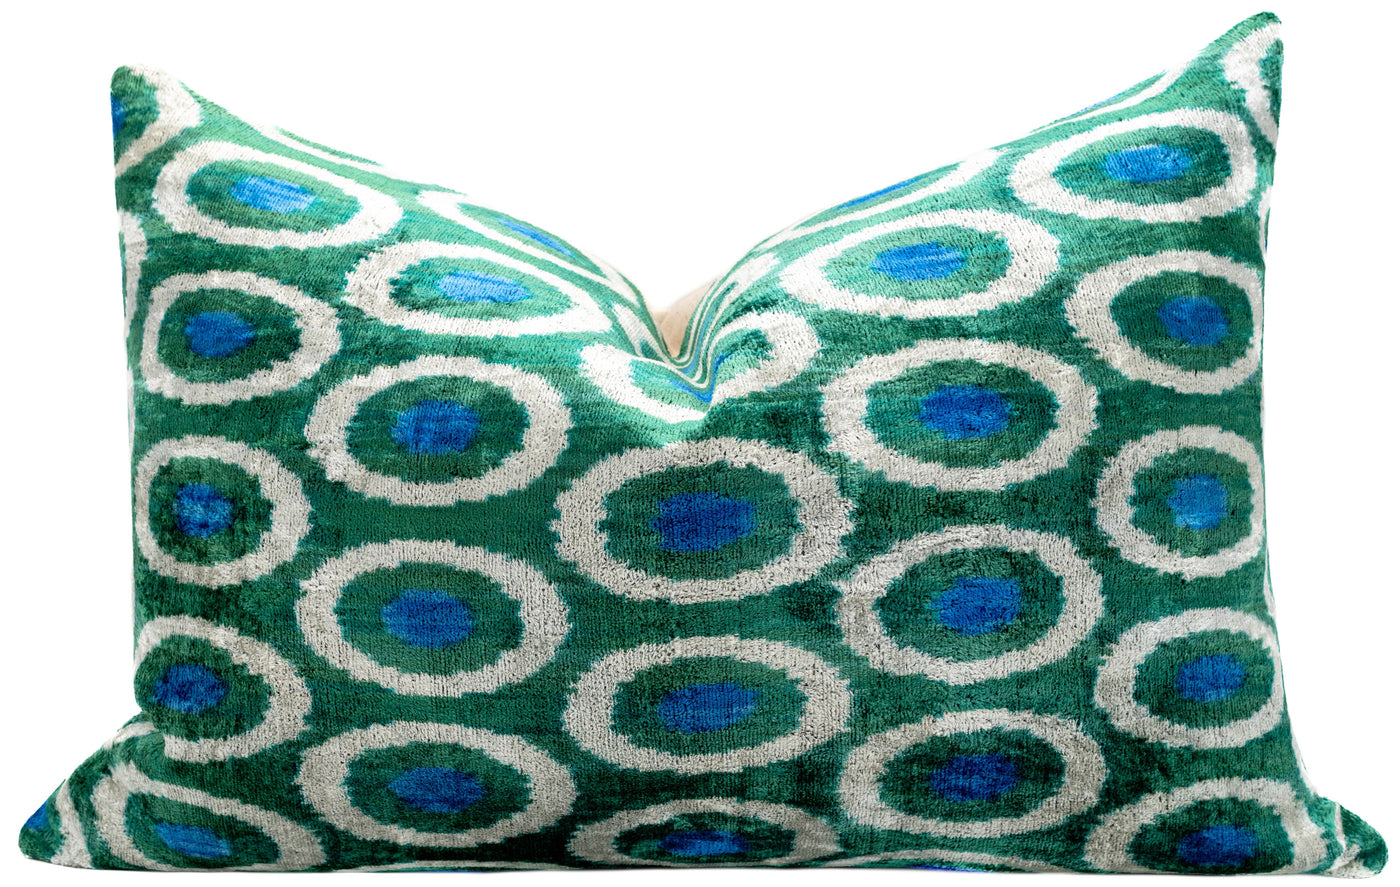 Handmade Green and Blue Circle Design Throw Pillow - 16x24 inch, Silk Velvet, Vegetable Dyed with Premium Down Feather Insert